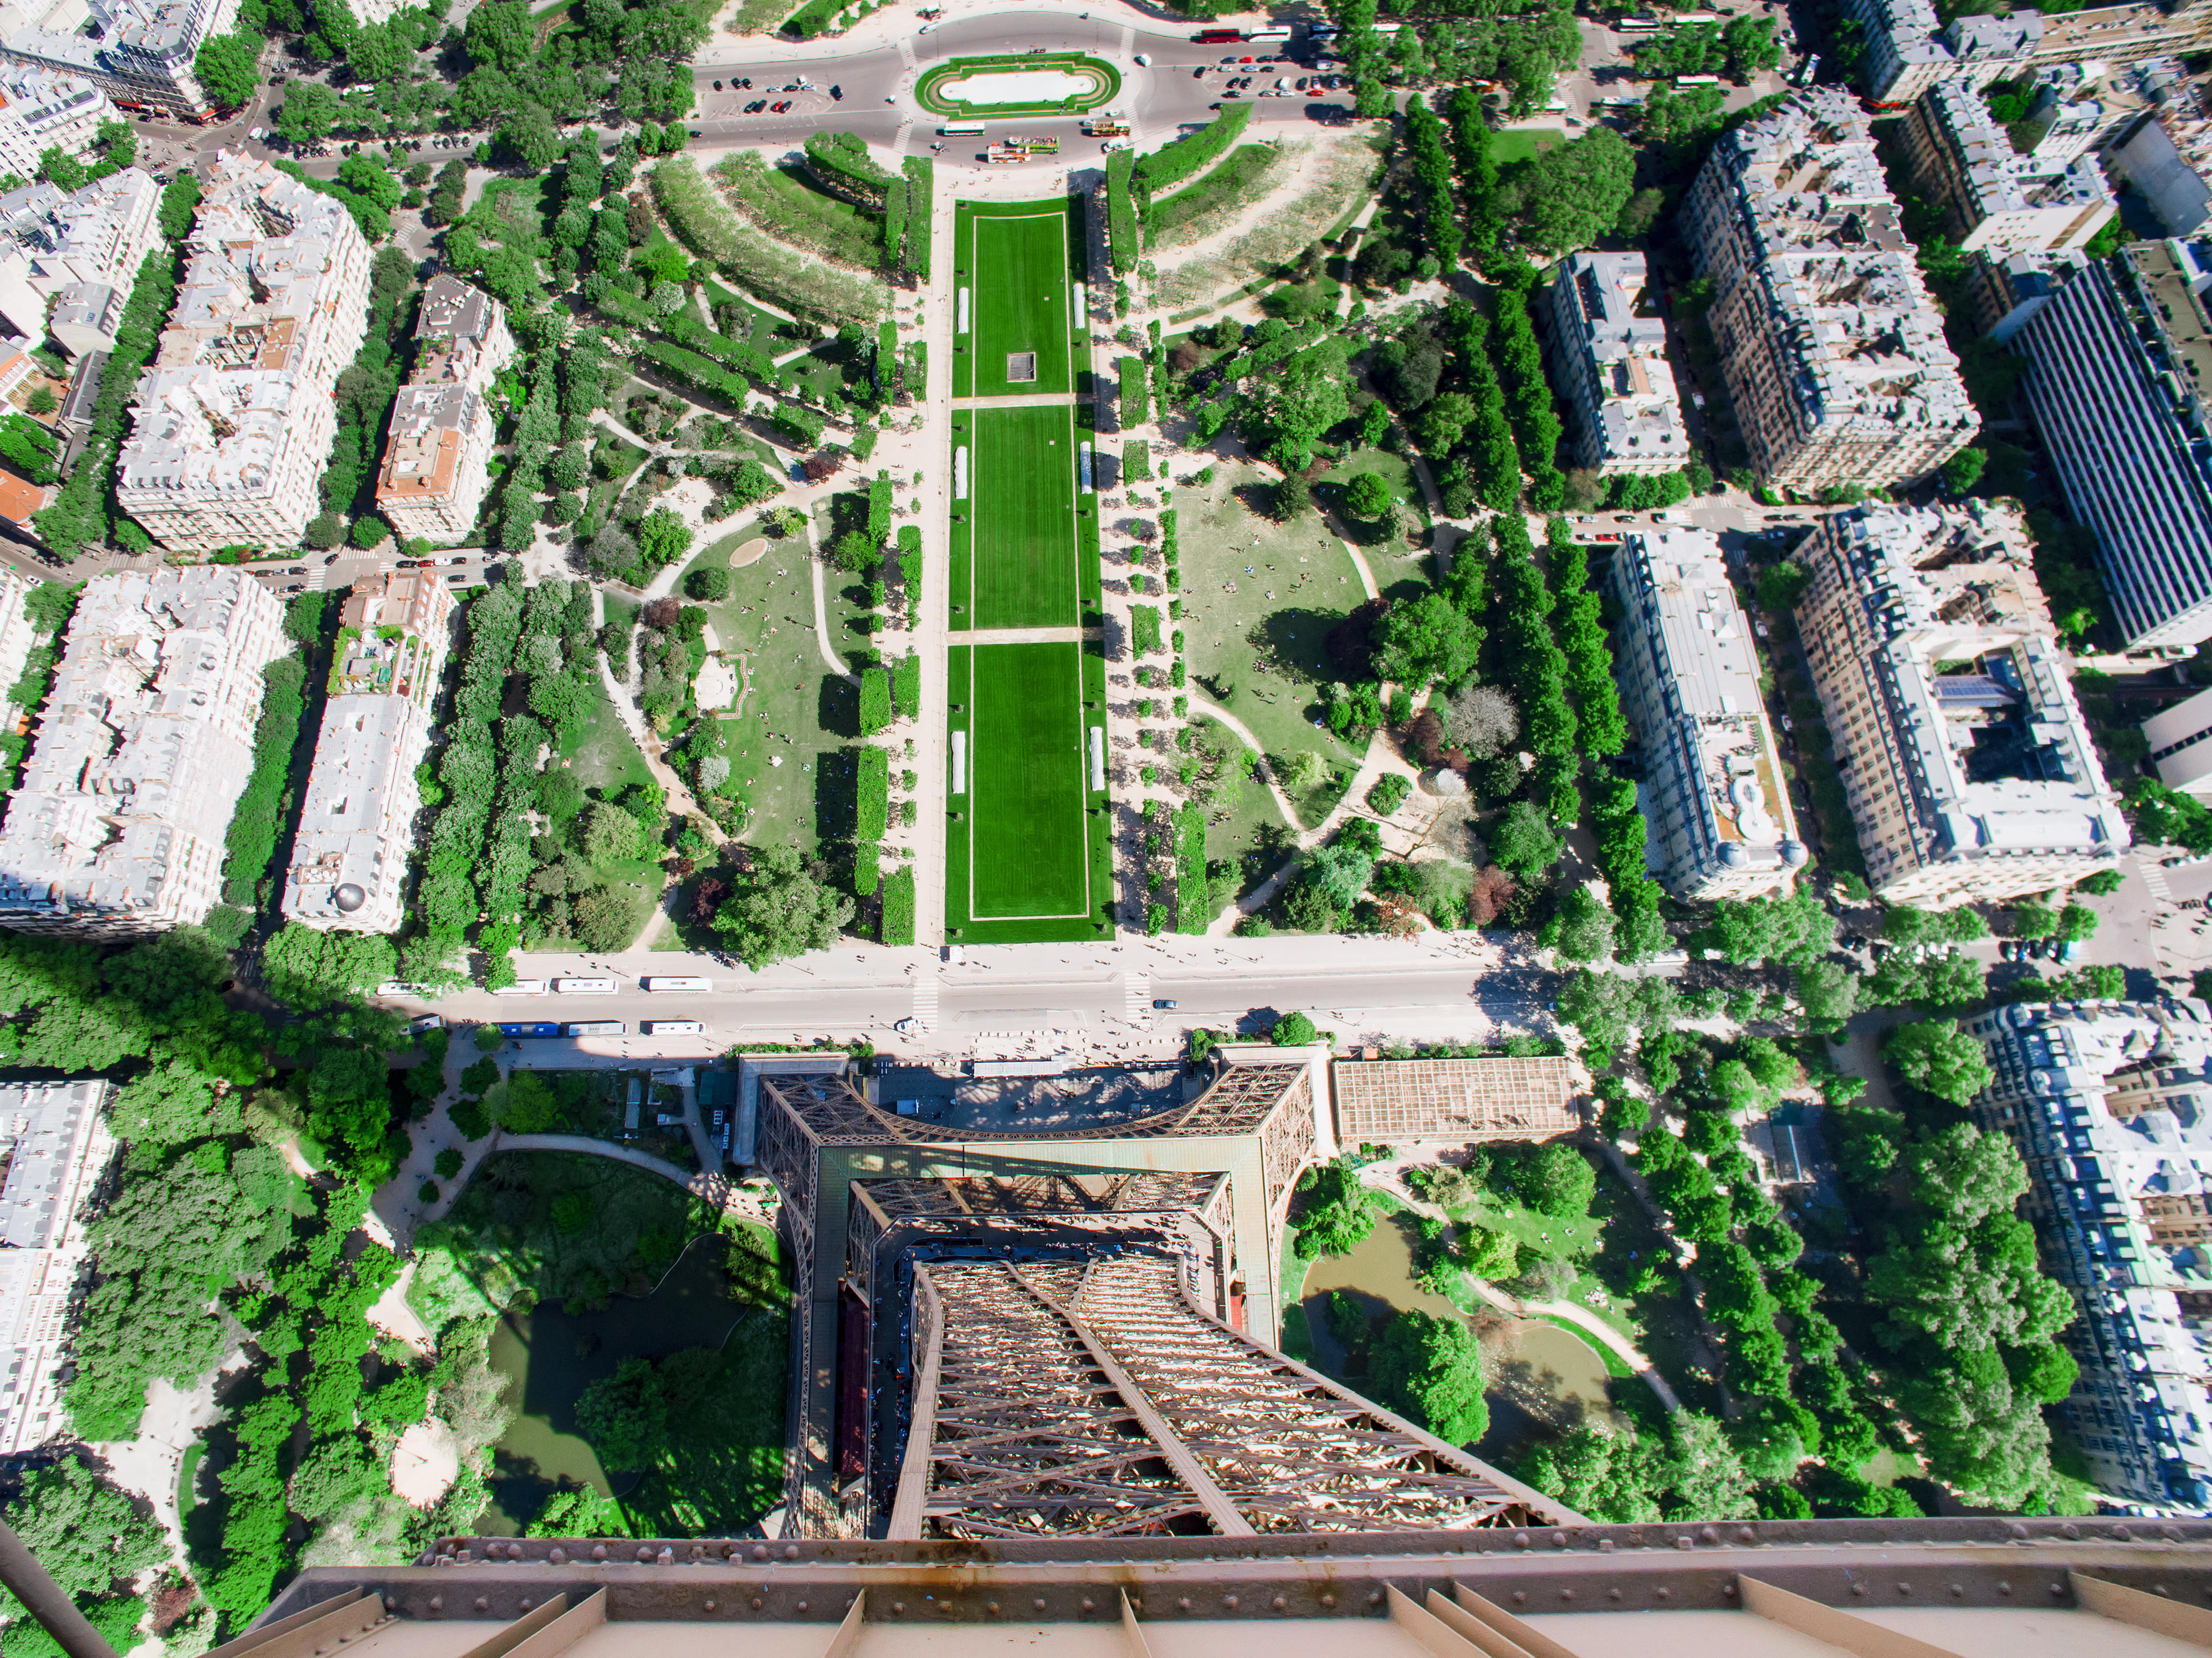 View from Eiffel Tower Top